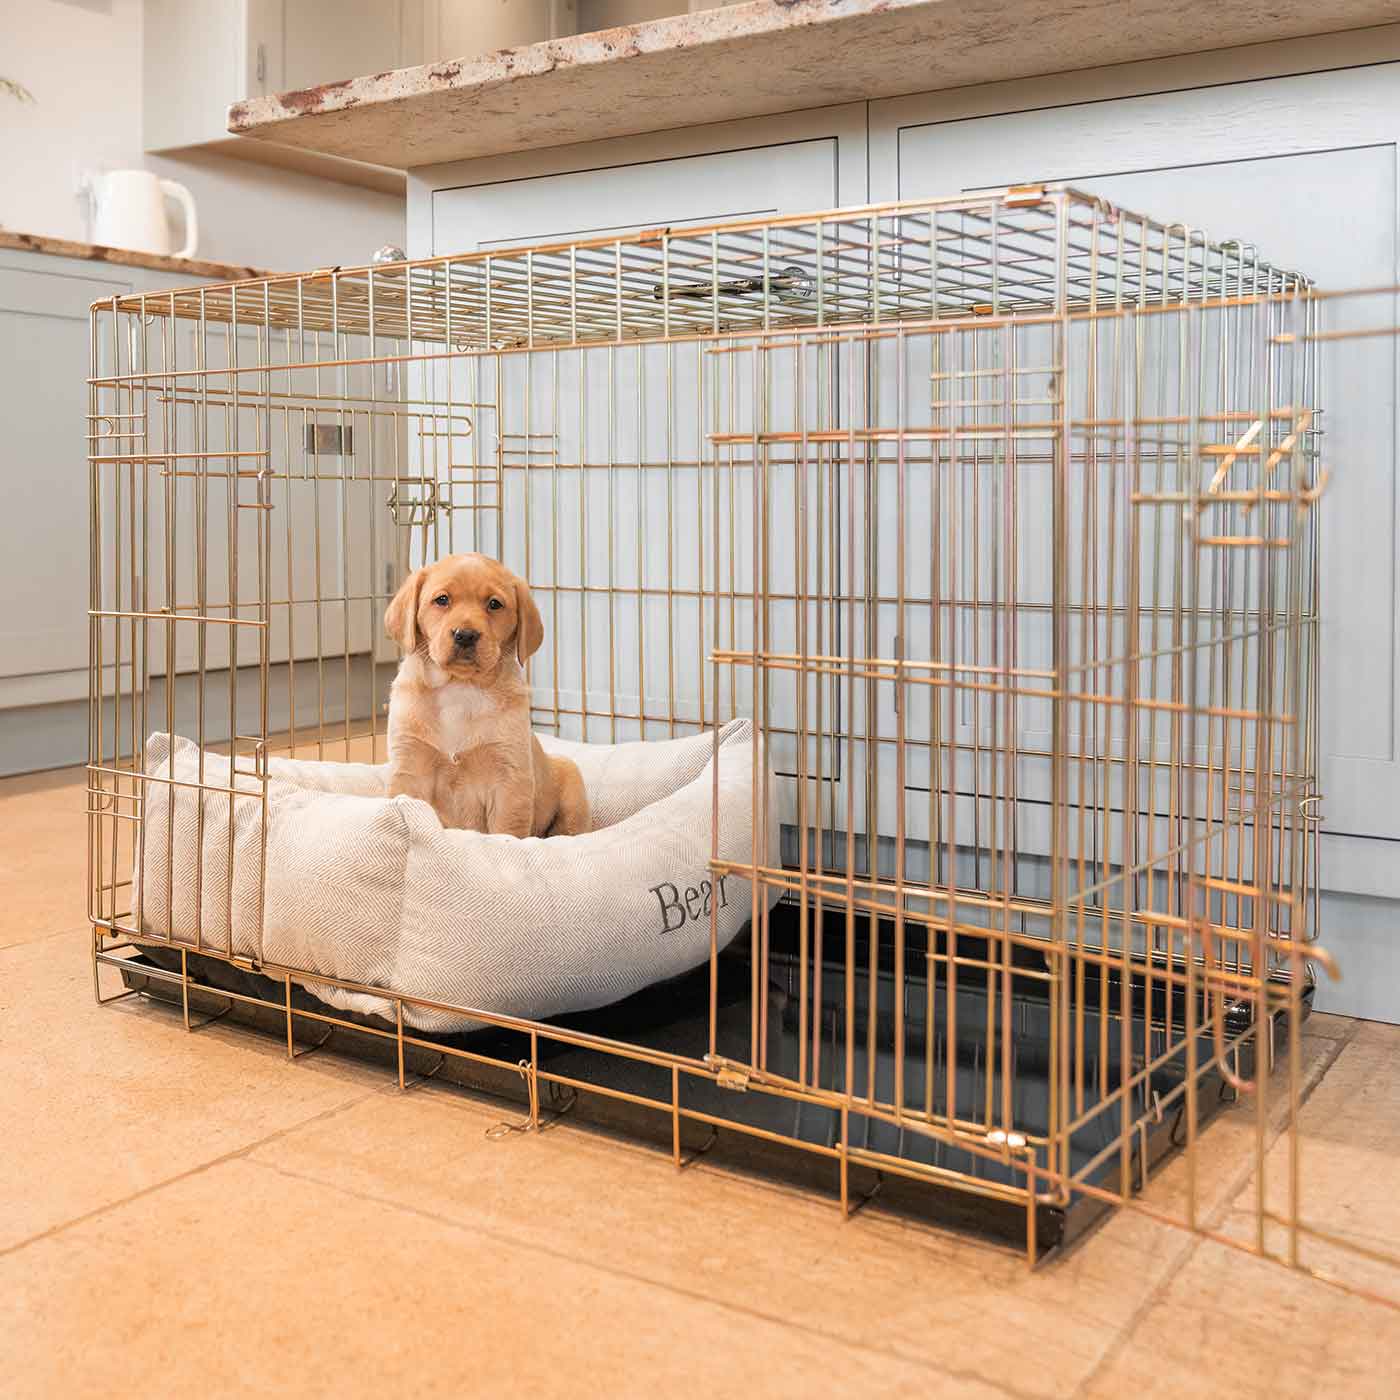  Cosy & Calm Puppy Crate Bed, The Perfect Dog Crate Accessory For The Ultimate Dog Den! In Stunning Natural Herringbone Tweed! Available Now at Lords & Labradors